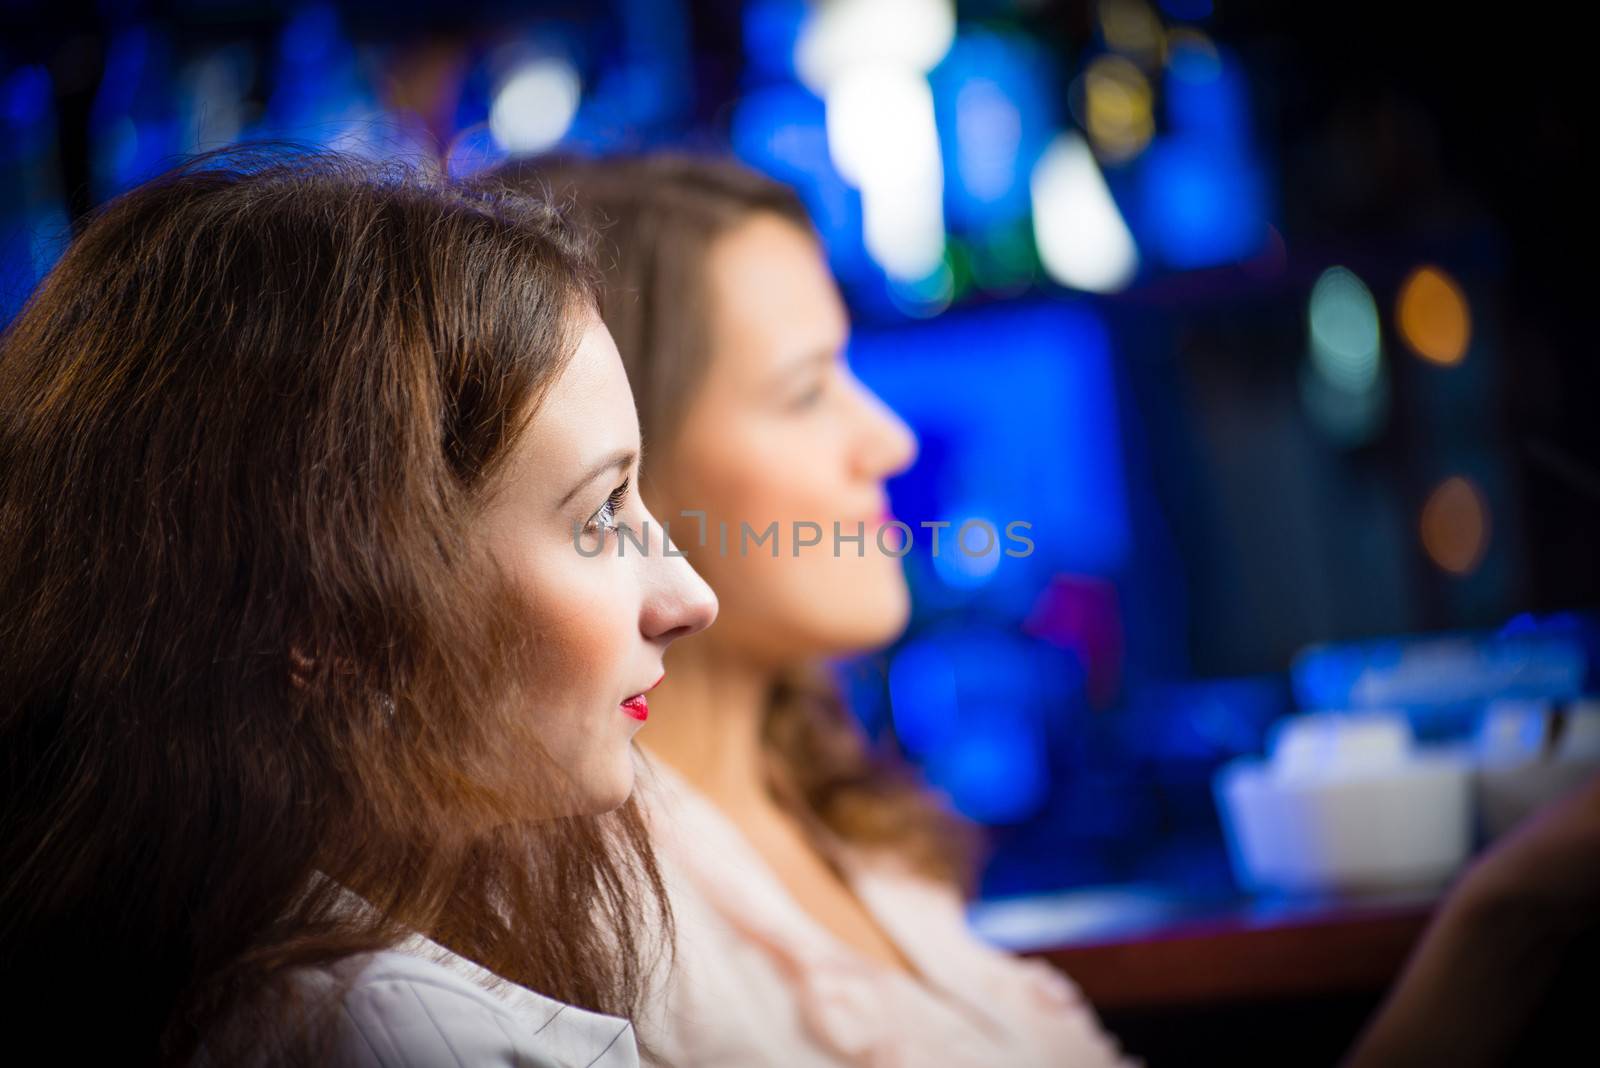 portrait of a young woman in a bar